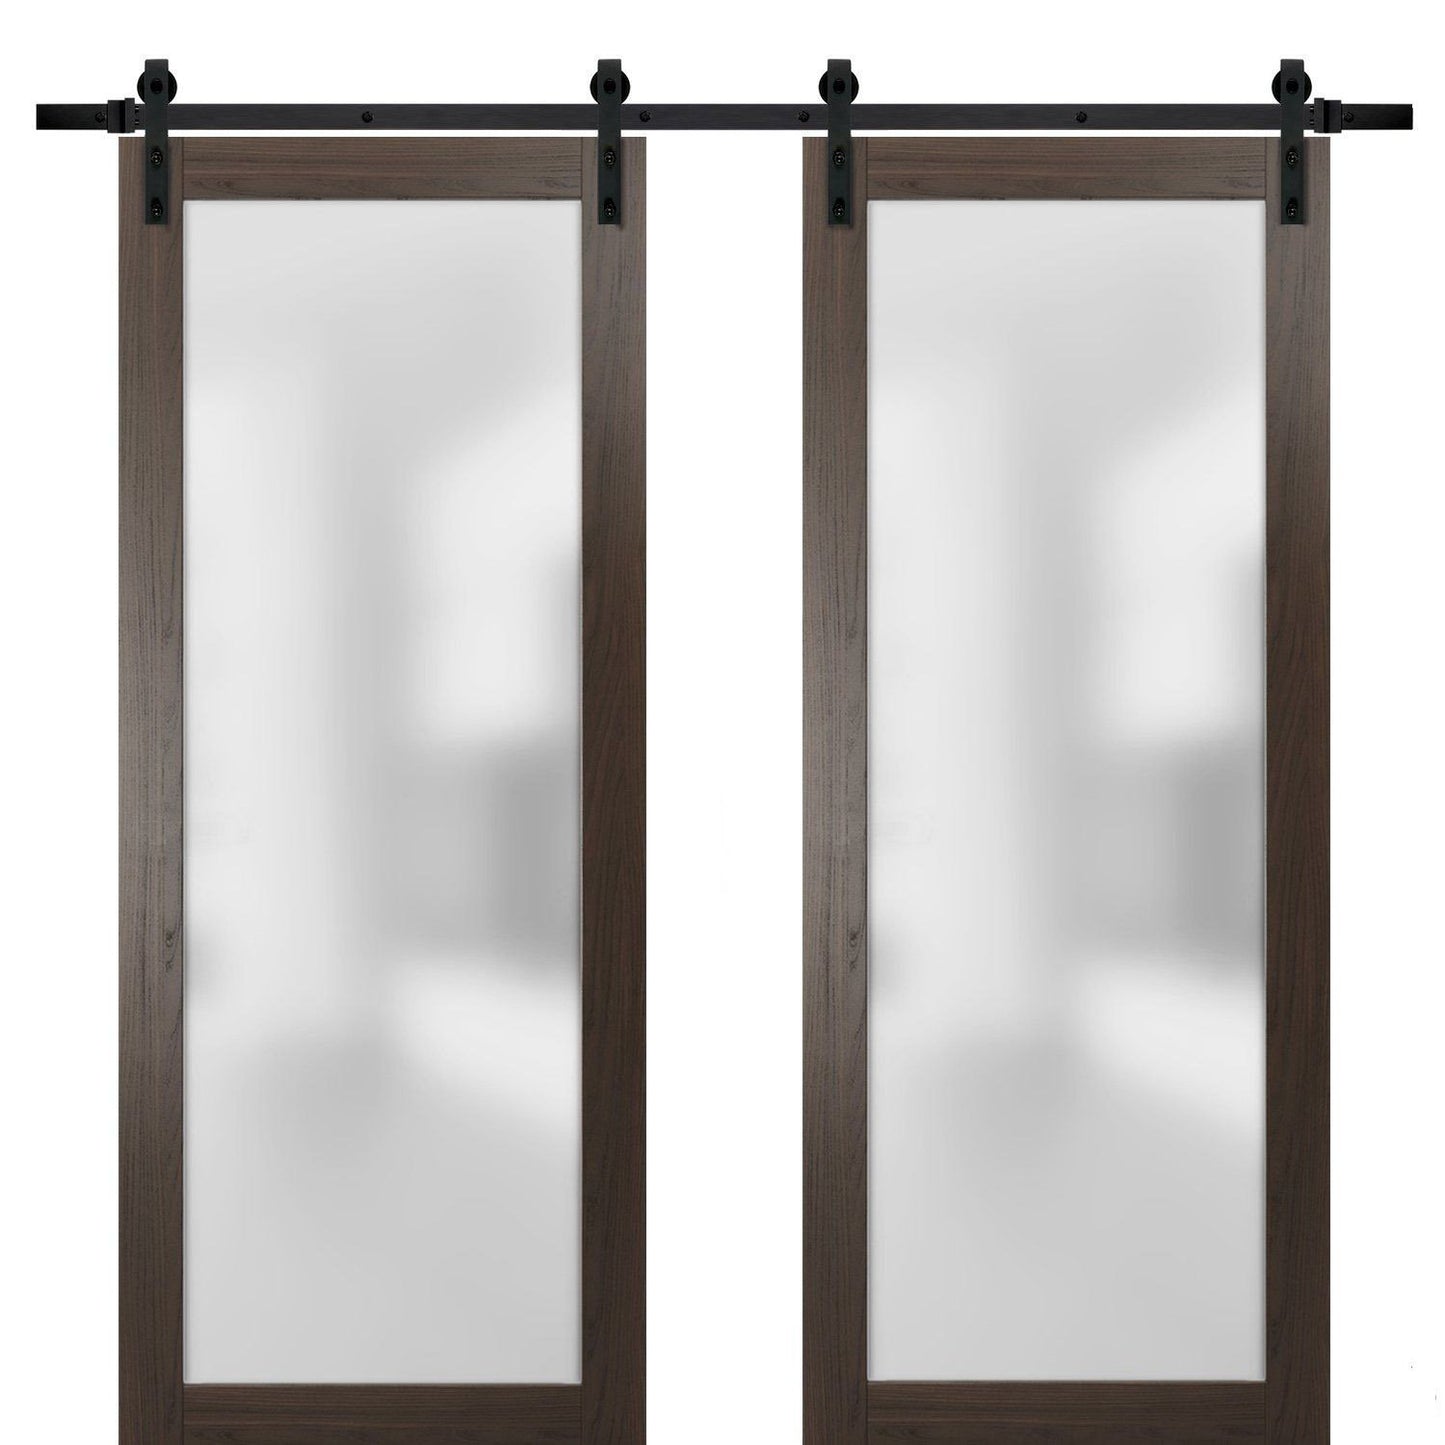 Planum 2102 Chocolate Ash Double Barn Door with Frosted Glass | Black Rail